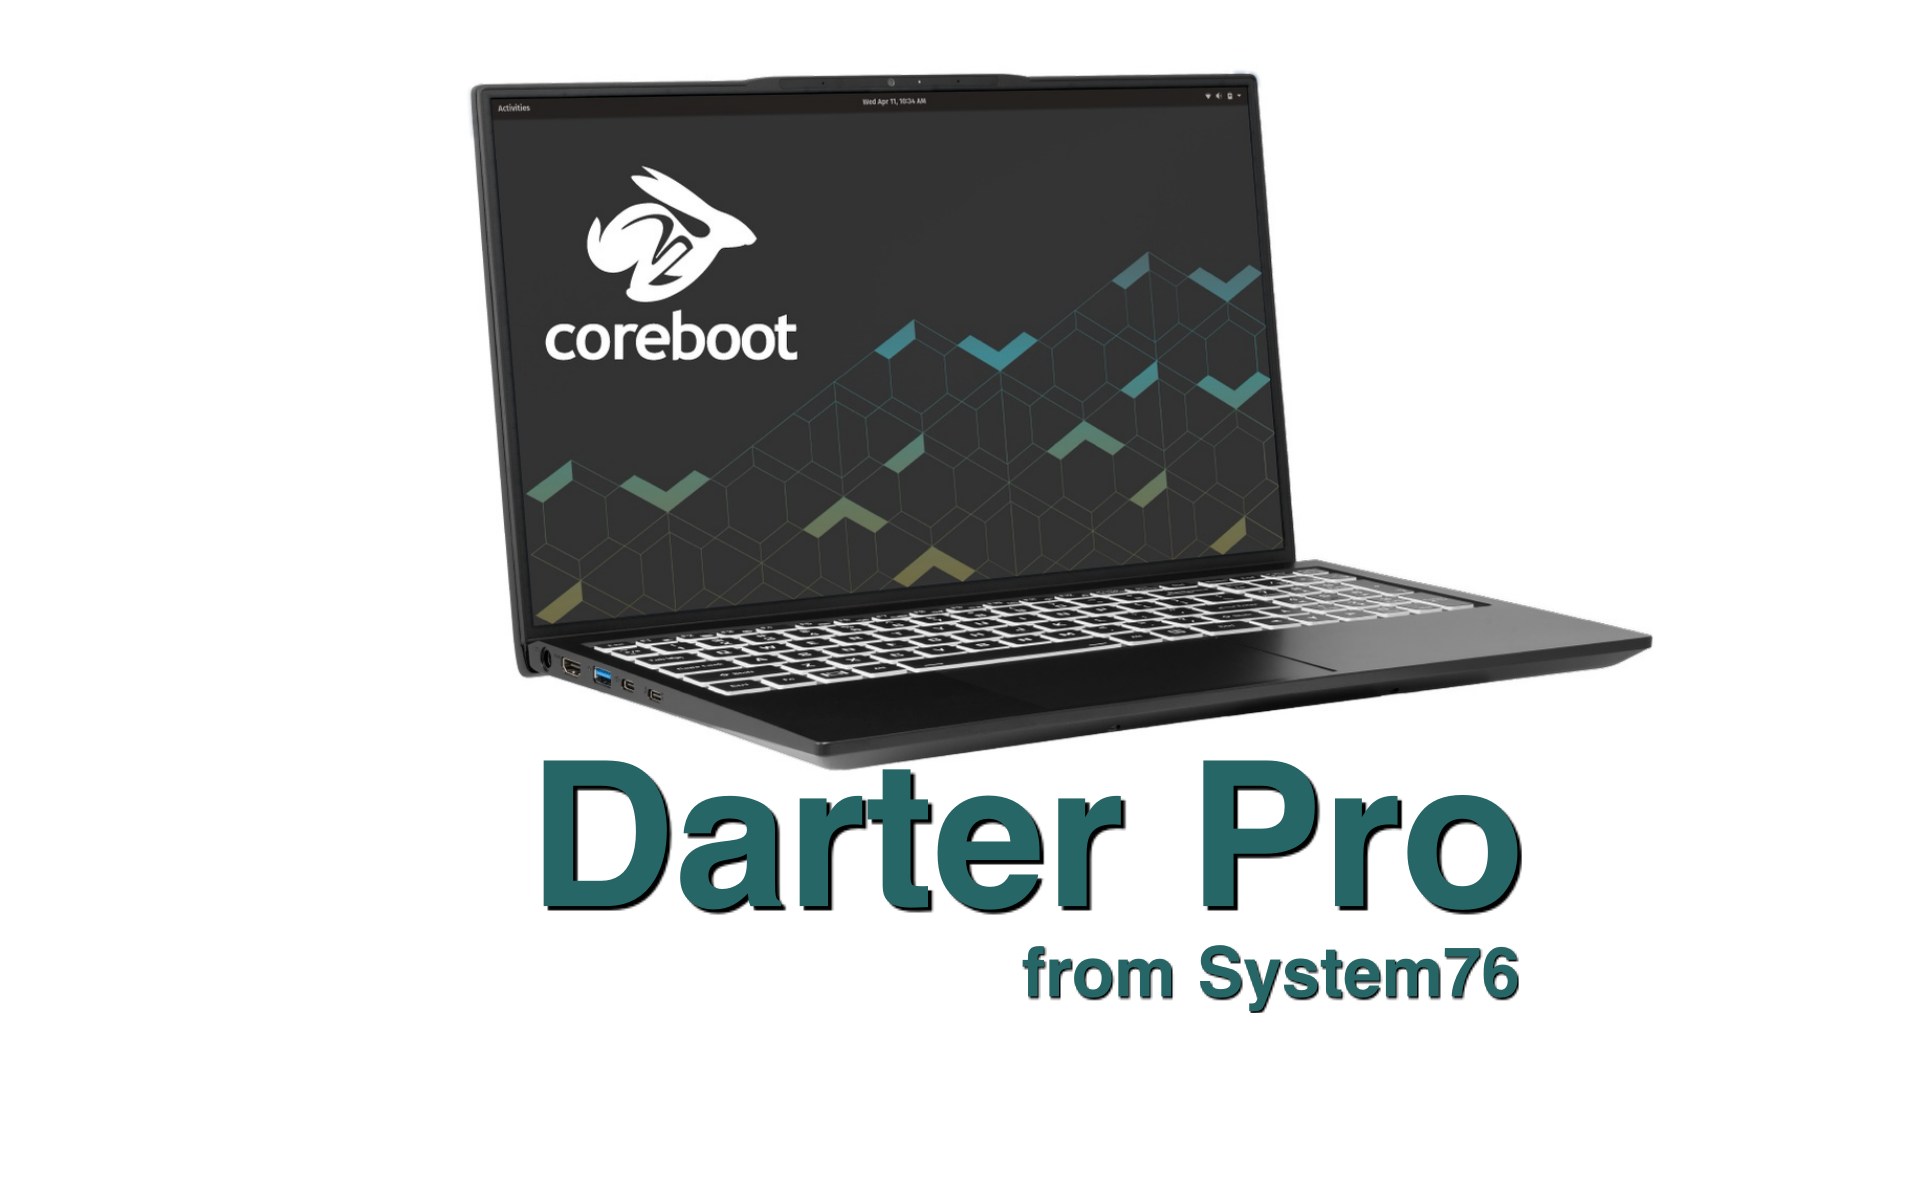 System76 Brings Back the Darter Pro Linux Laptop with Longer Battery Life, Tiger Lake CPUs